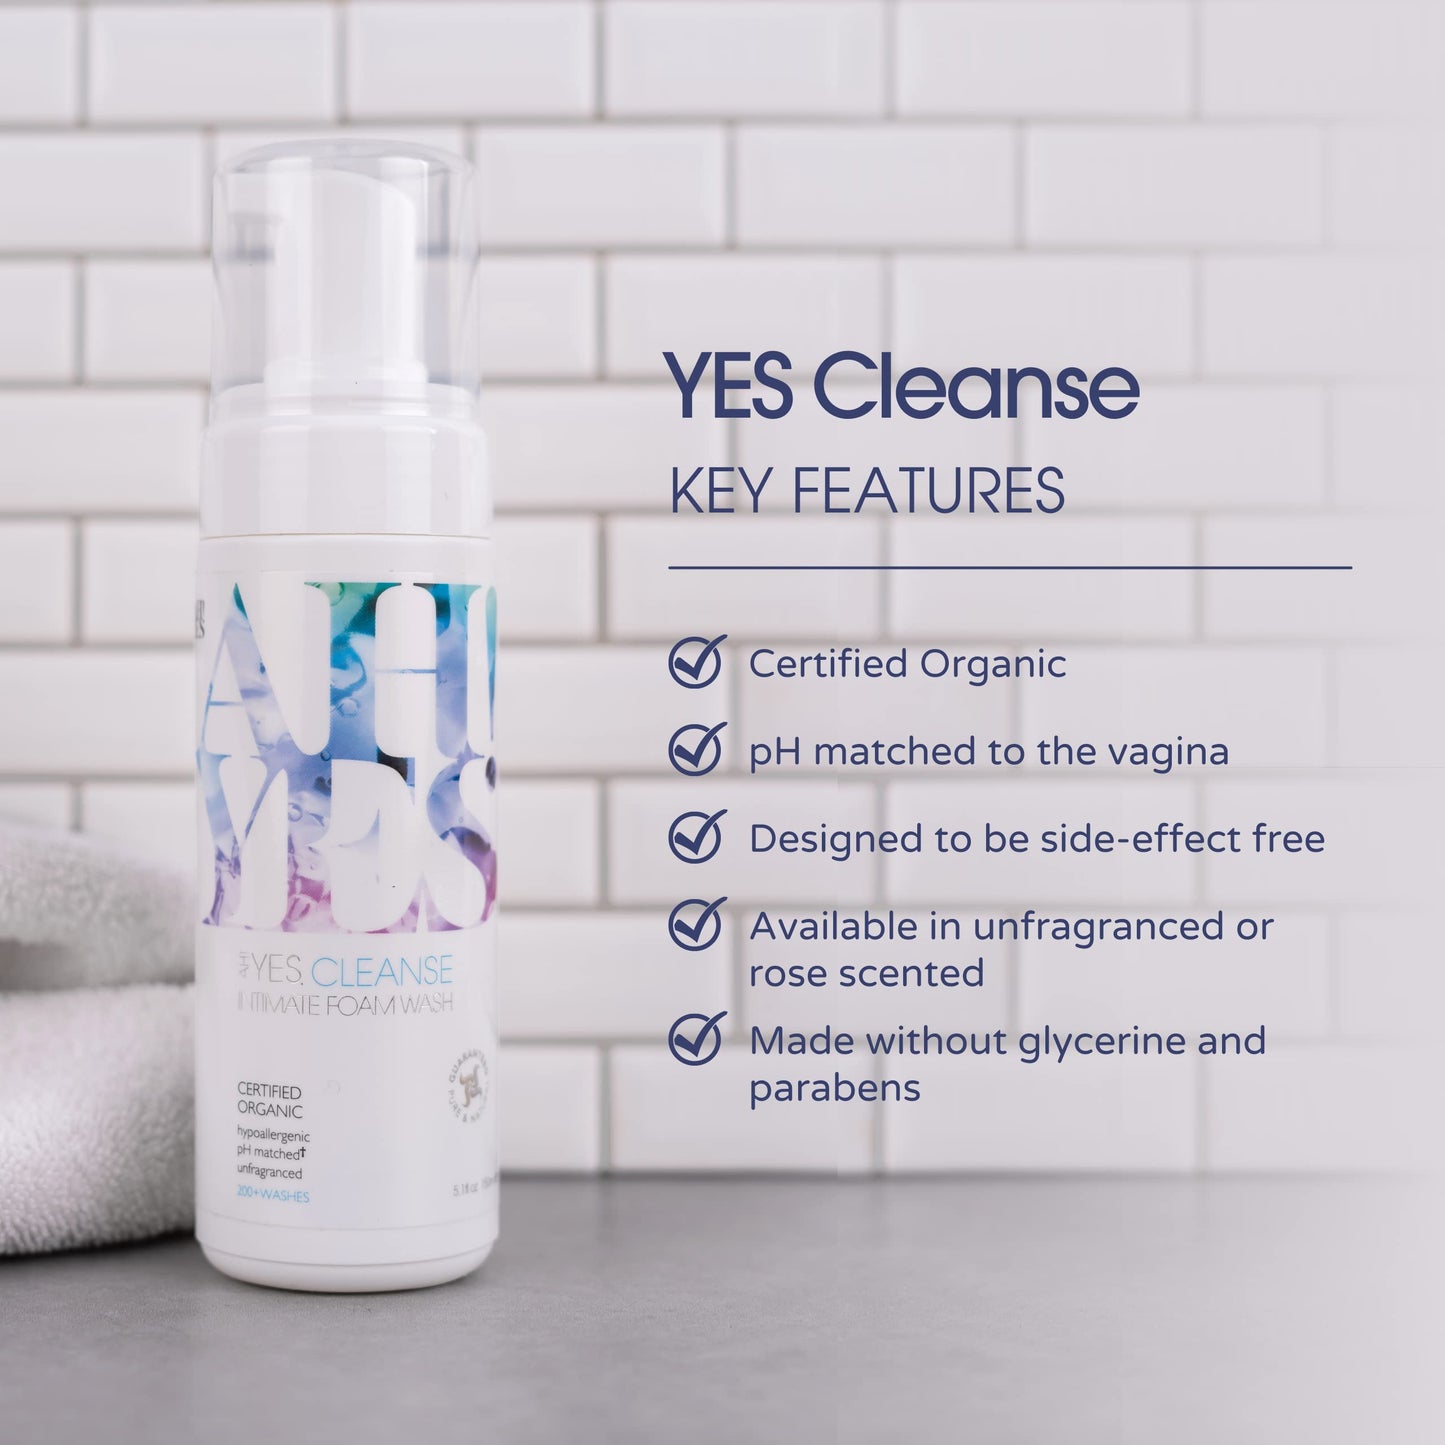 AH! YES CLEANSE Gentle, Organic Foaming Feminine Wash- Unfragranced, pH Matched Vaginal Wash